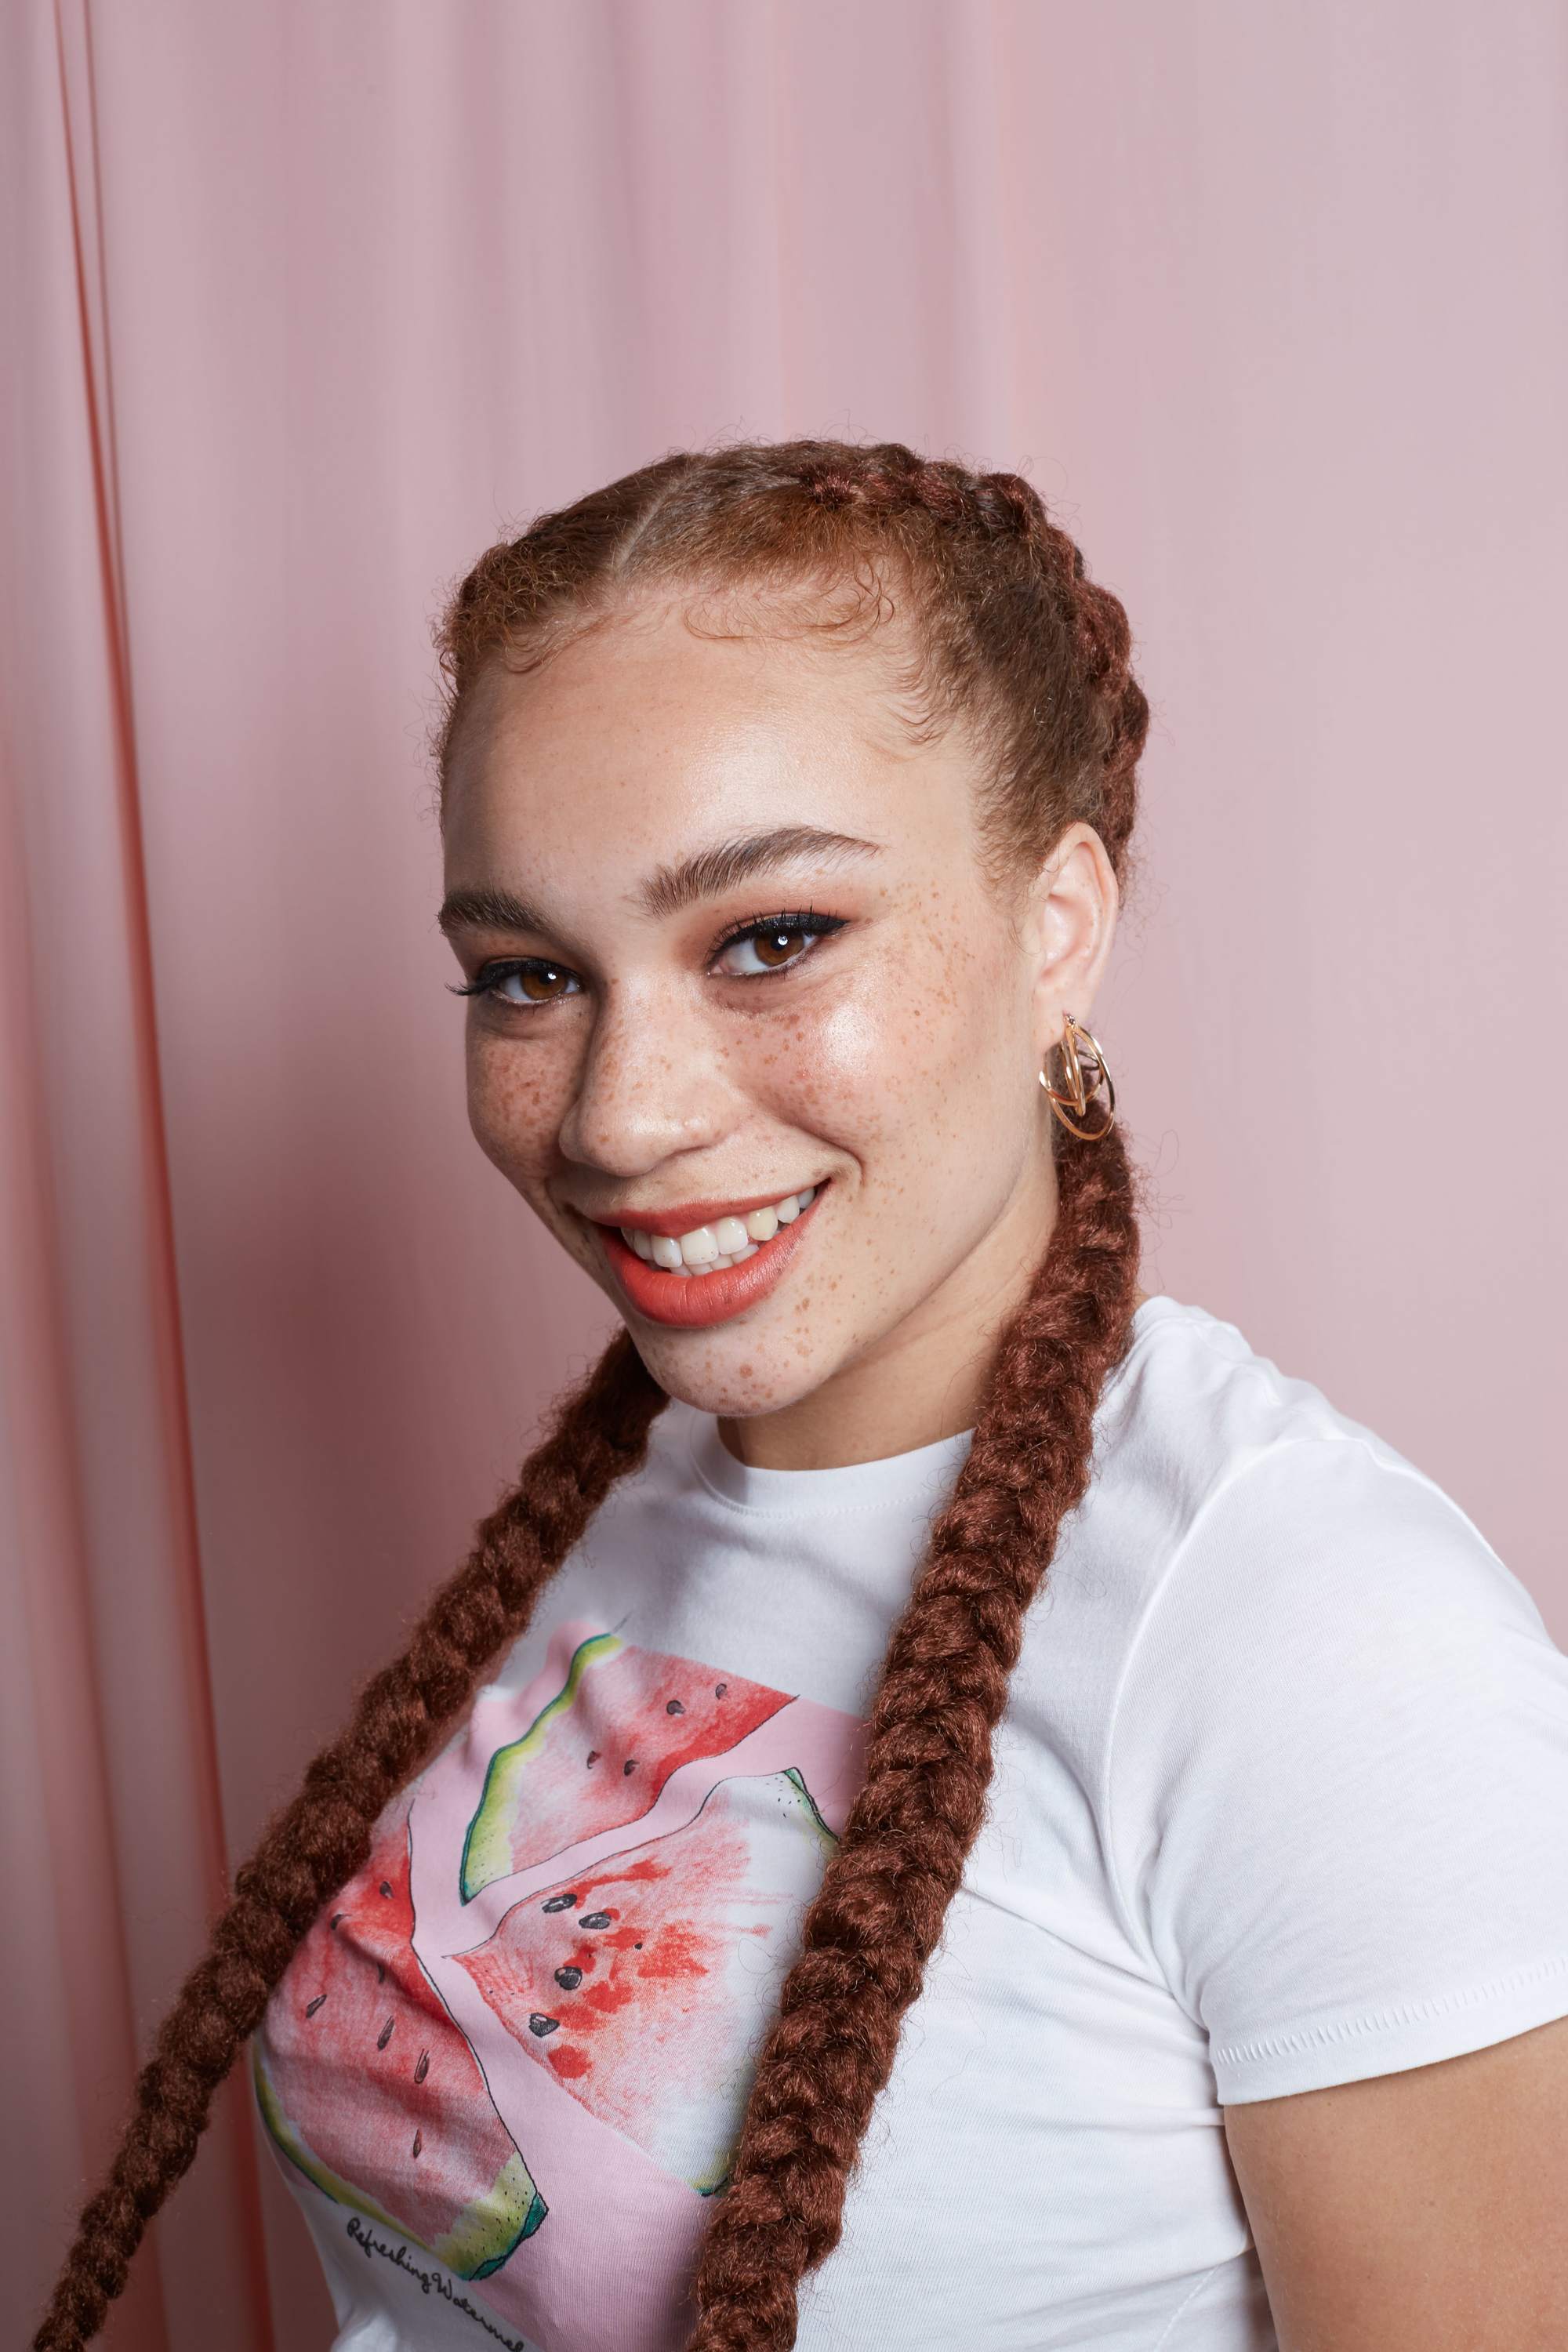 Expert Tips to Wear Braids Safely This Summer